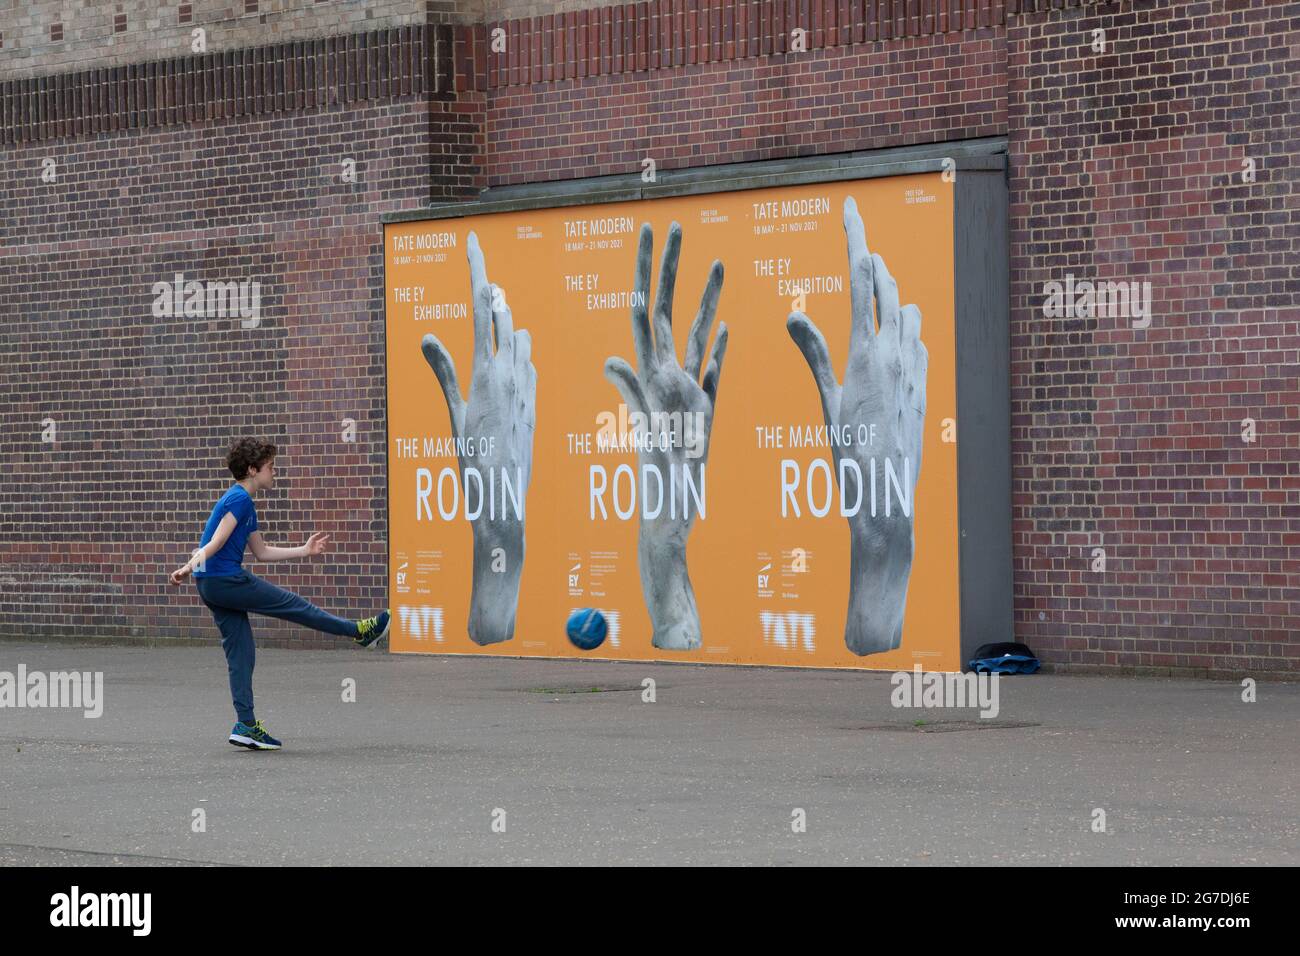 London, UK, 13 July 2021: A boy kicks a ball against a wall at Tate Modern, nect to posters for an exhibition of Rodin's sculptures. Places for outdoor play have been reduced over the years and not all children have access to play space. Anna Watson/Alamy. Stock Photo